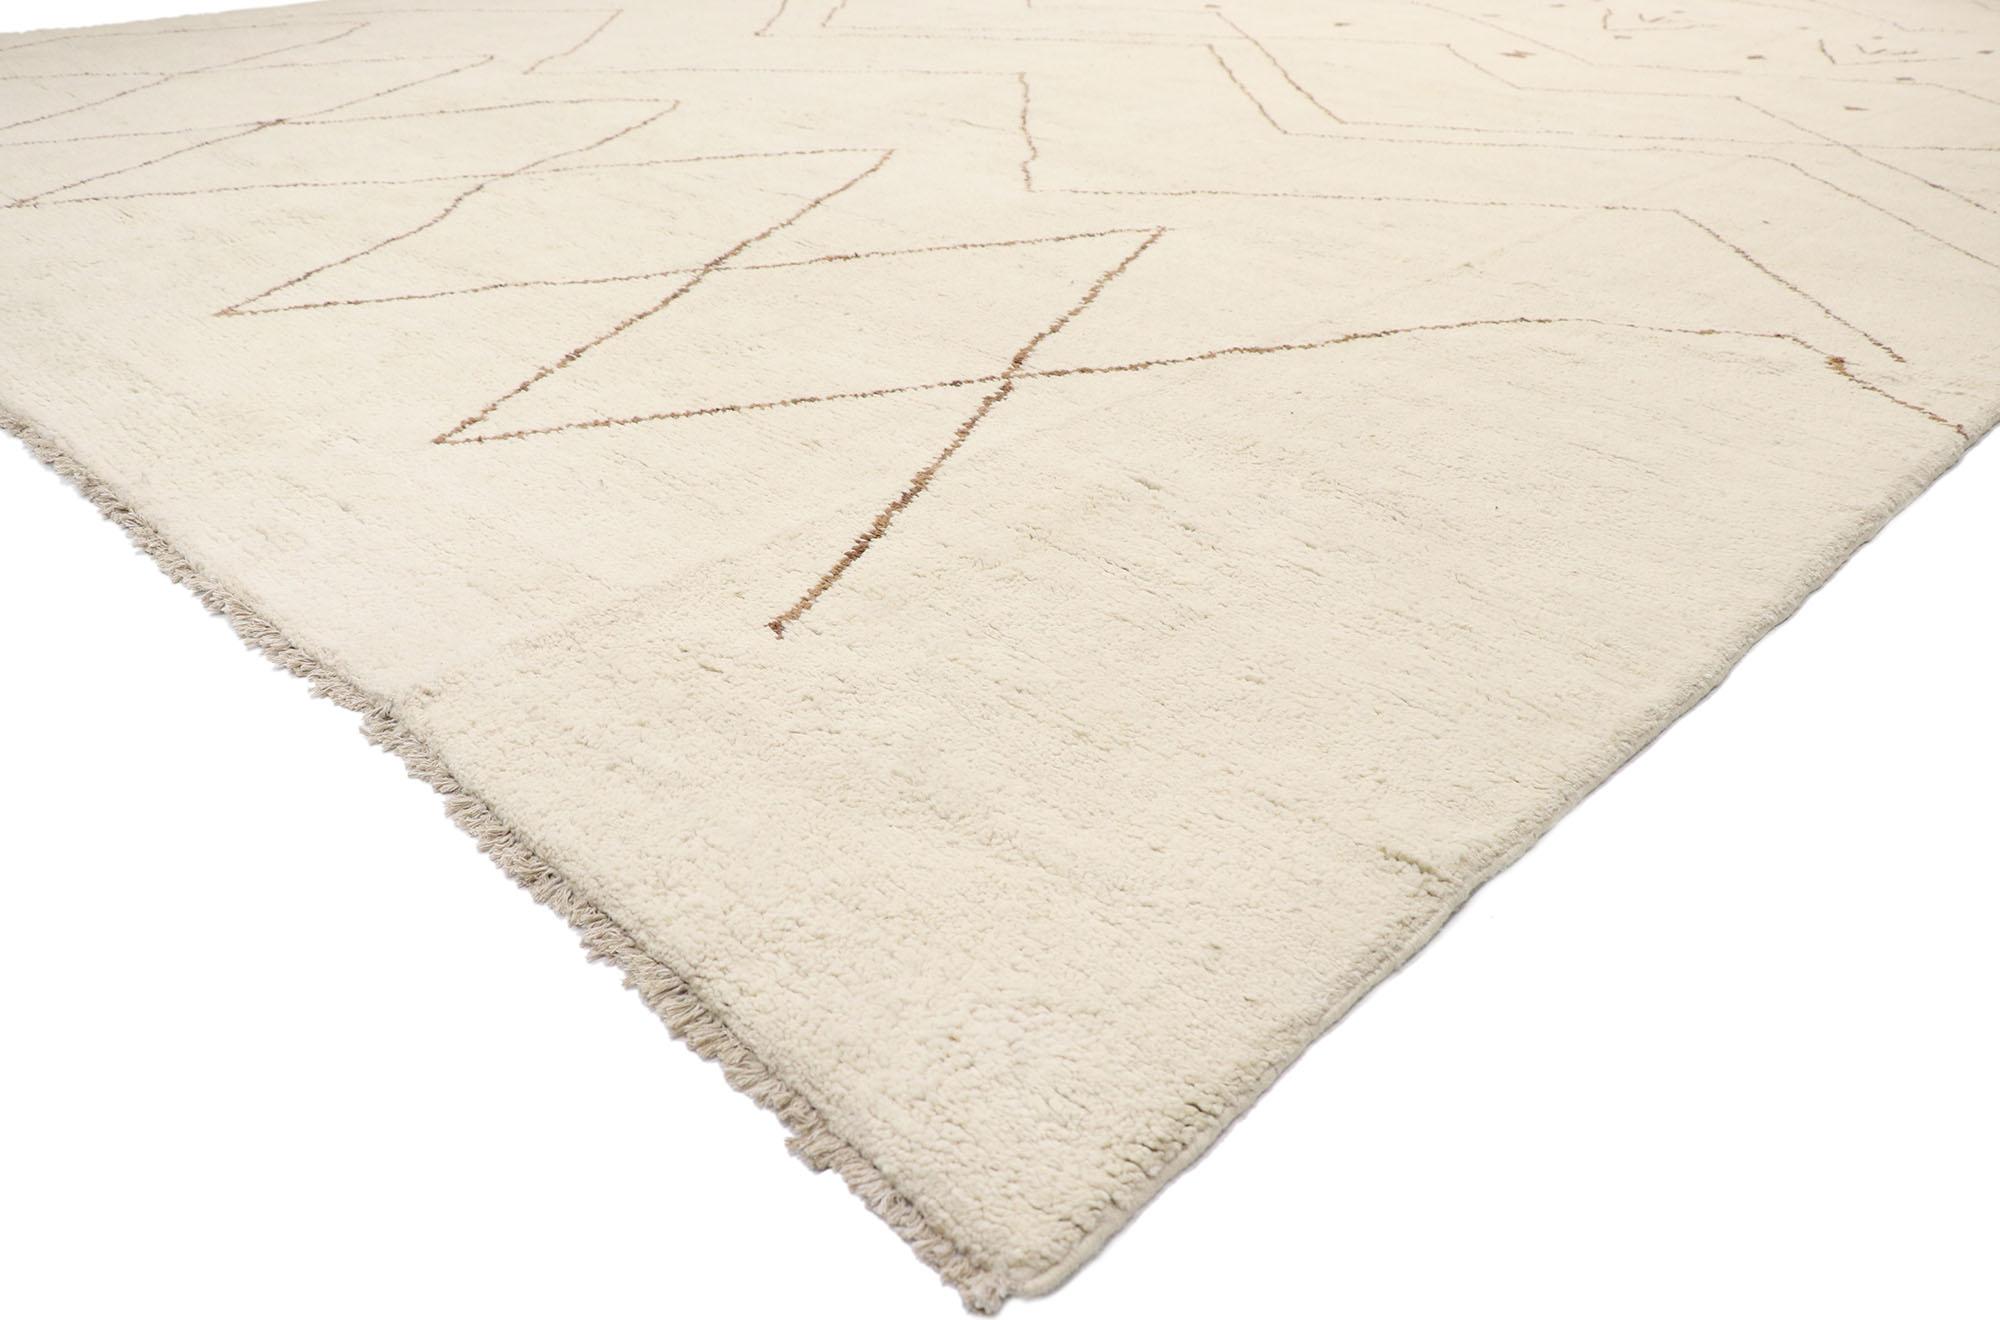 80655, new contemporary oversized Moroccan style rug with Minimalist Tribal vibes. Decidedly modern and retro in feel, this hand-knotted wool contemporary Moroccan rug displays all the intrigue of tribal style with minimalist vibes. The abrashed